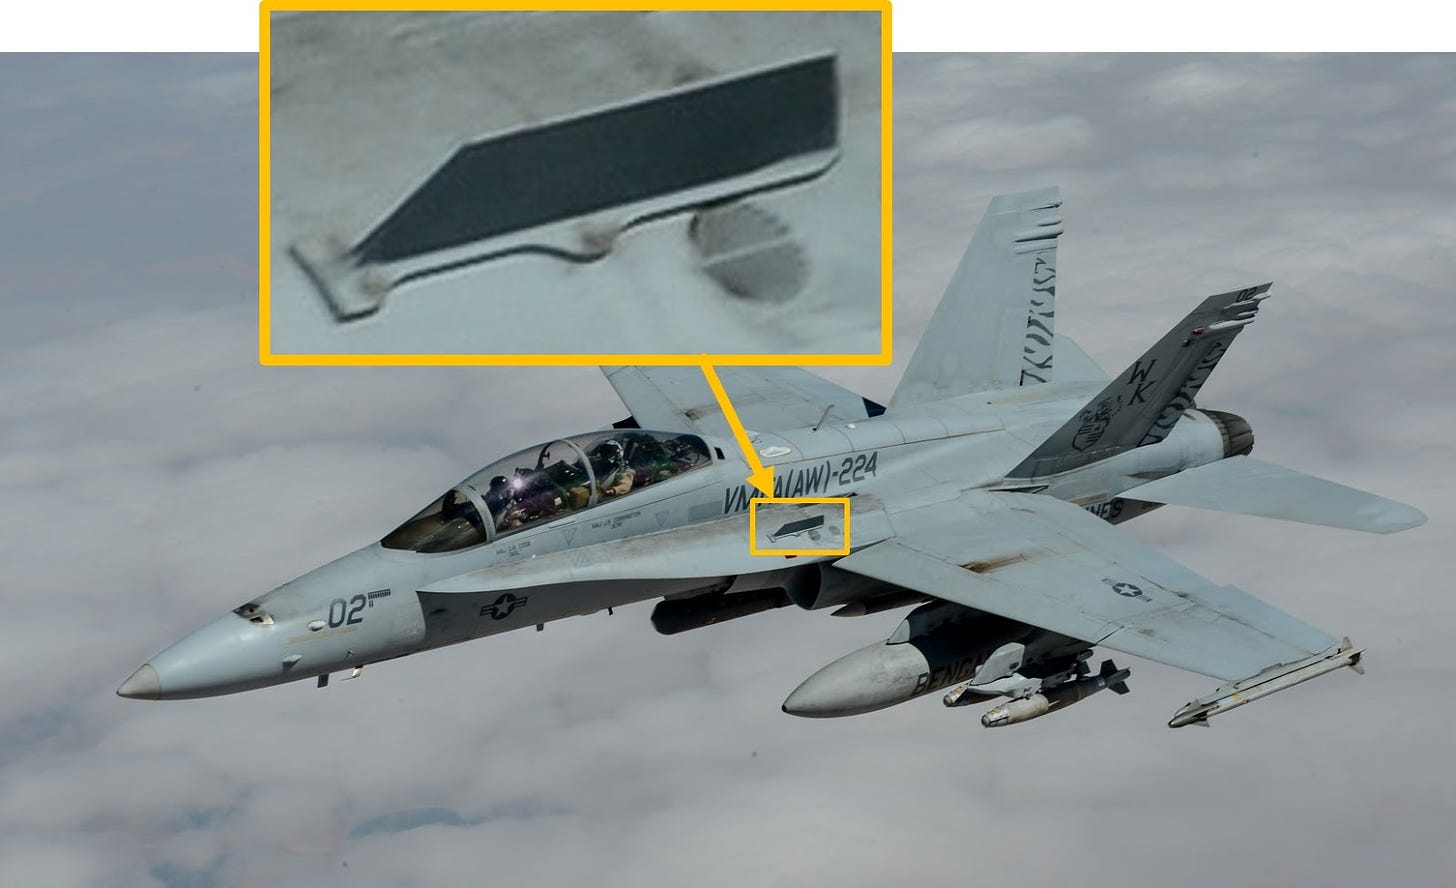 A twin-seat F/A-18 Hornet with a zoomed section highlighting one of the fences on the top of the aircraft